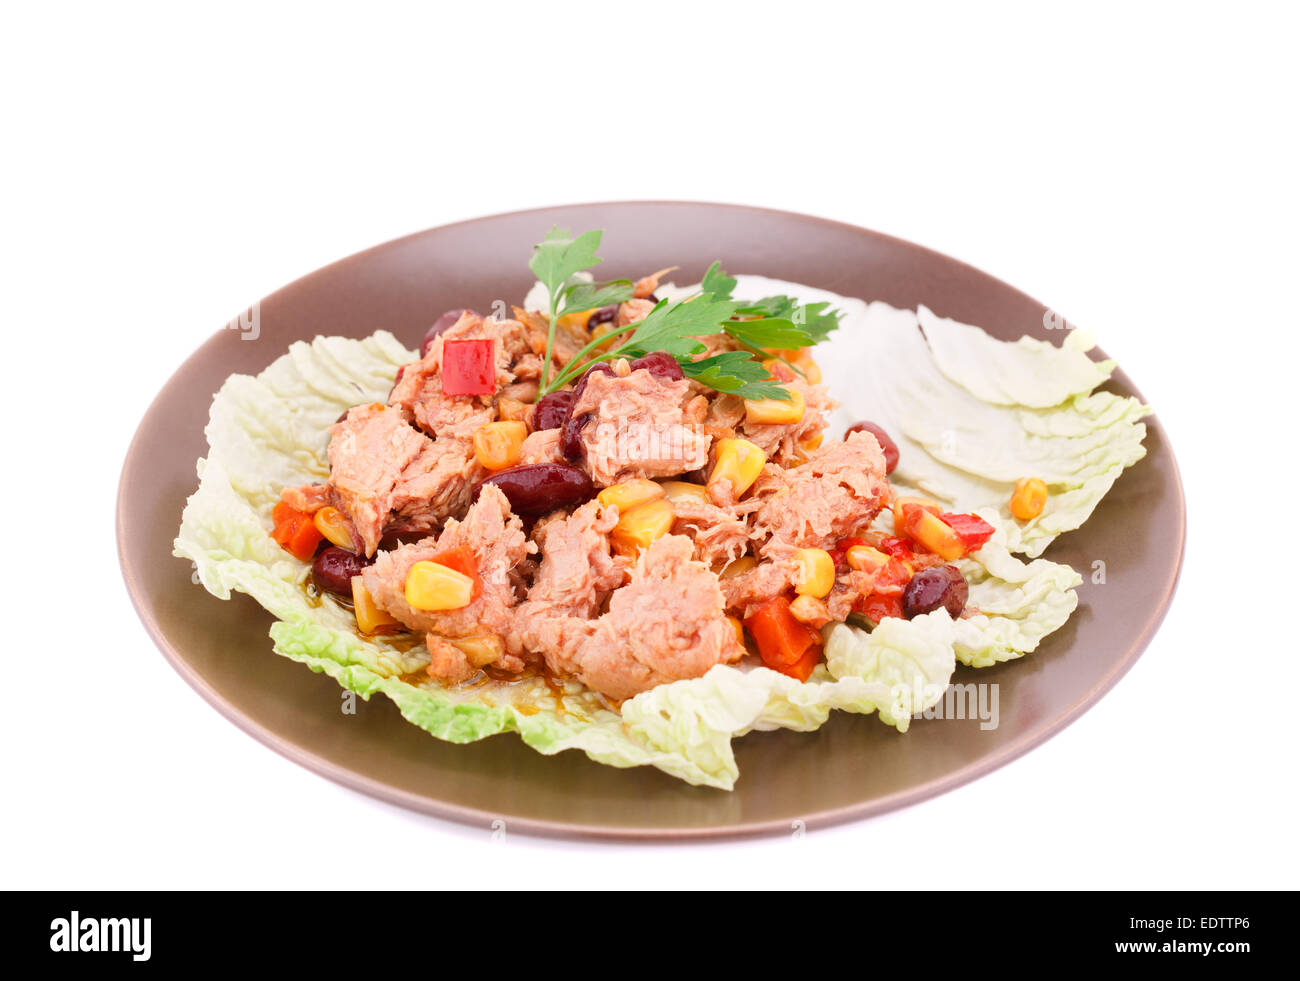 Tuna and kidney bean salad Cut Out Stock Images & Pictures - Alamy